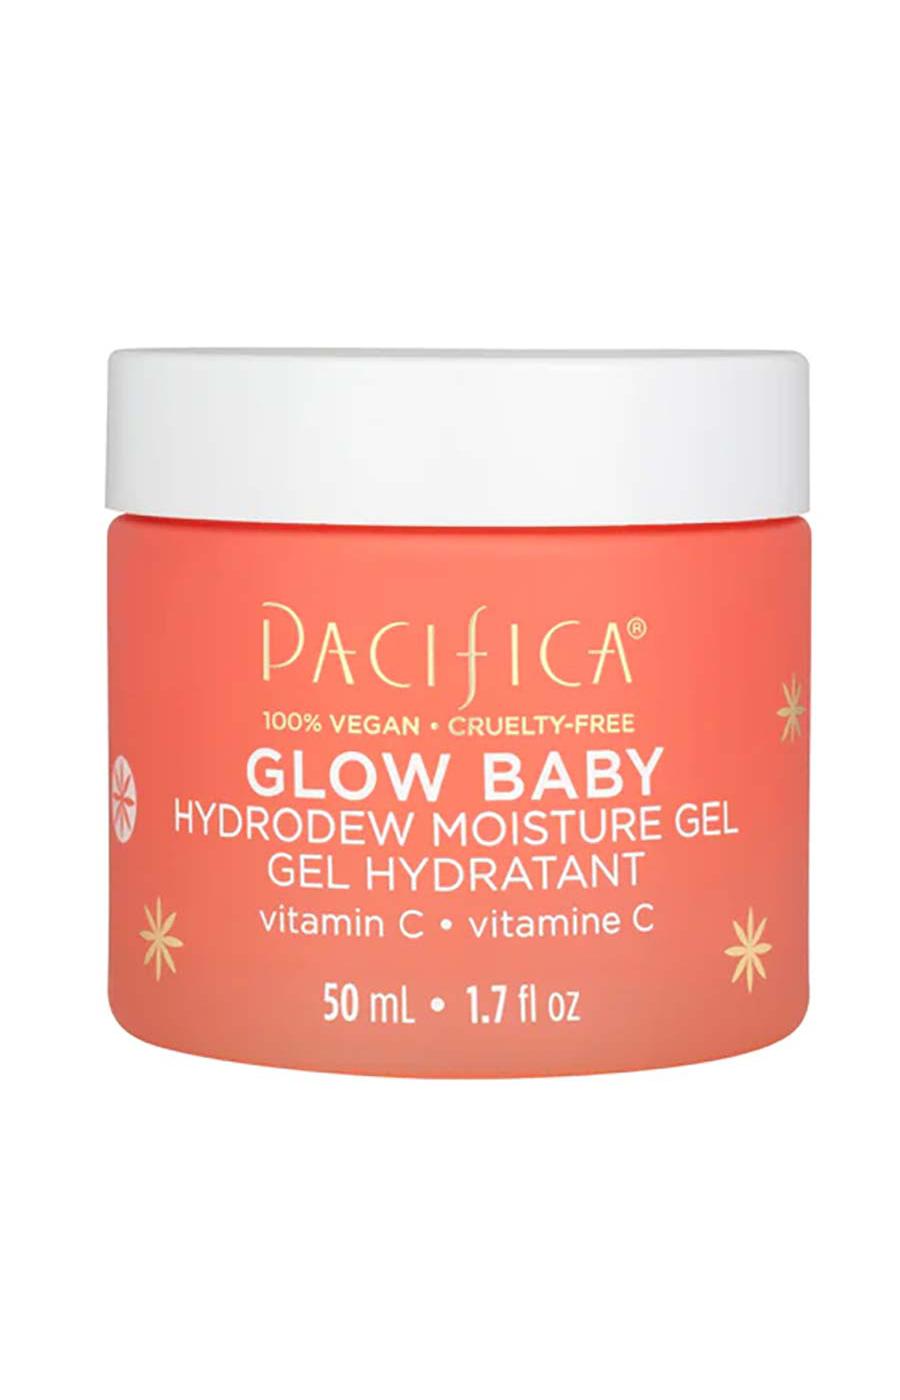 Pacifica Glow Baby Hydrodew Moisture Gel; image 2 of 2